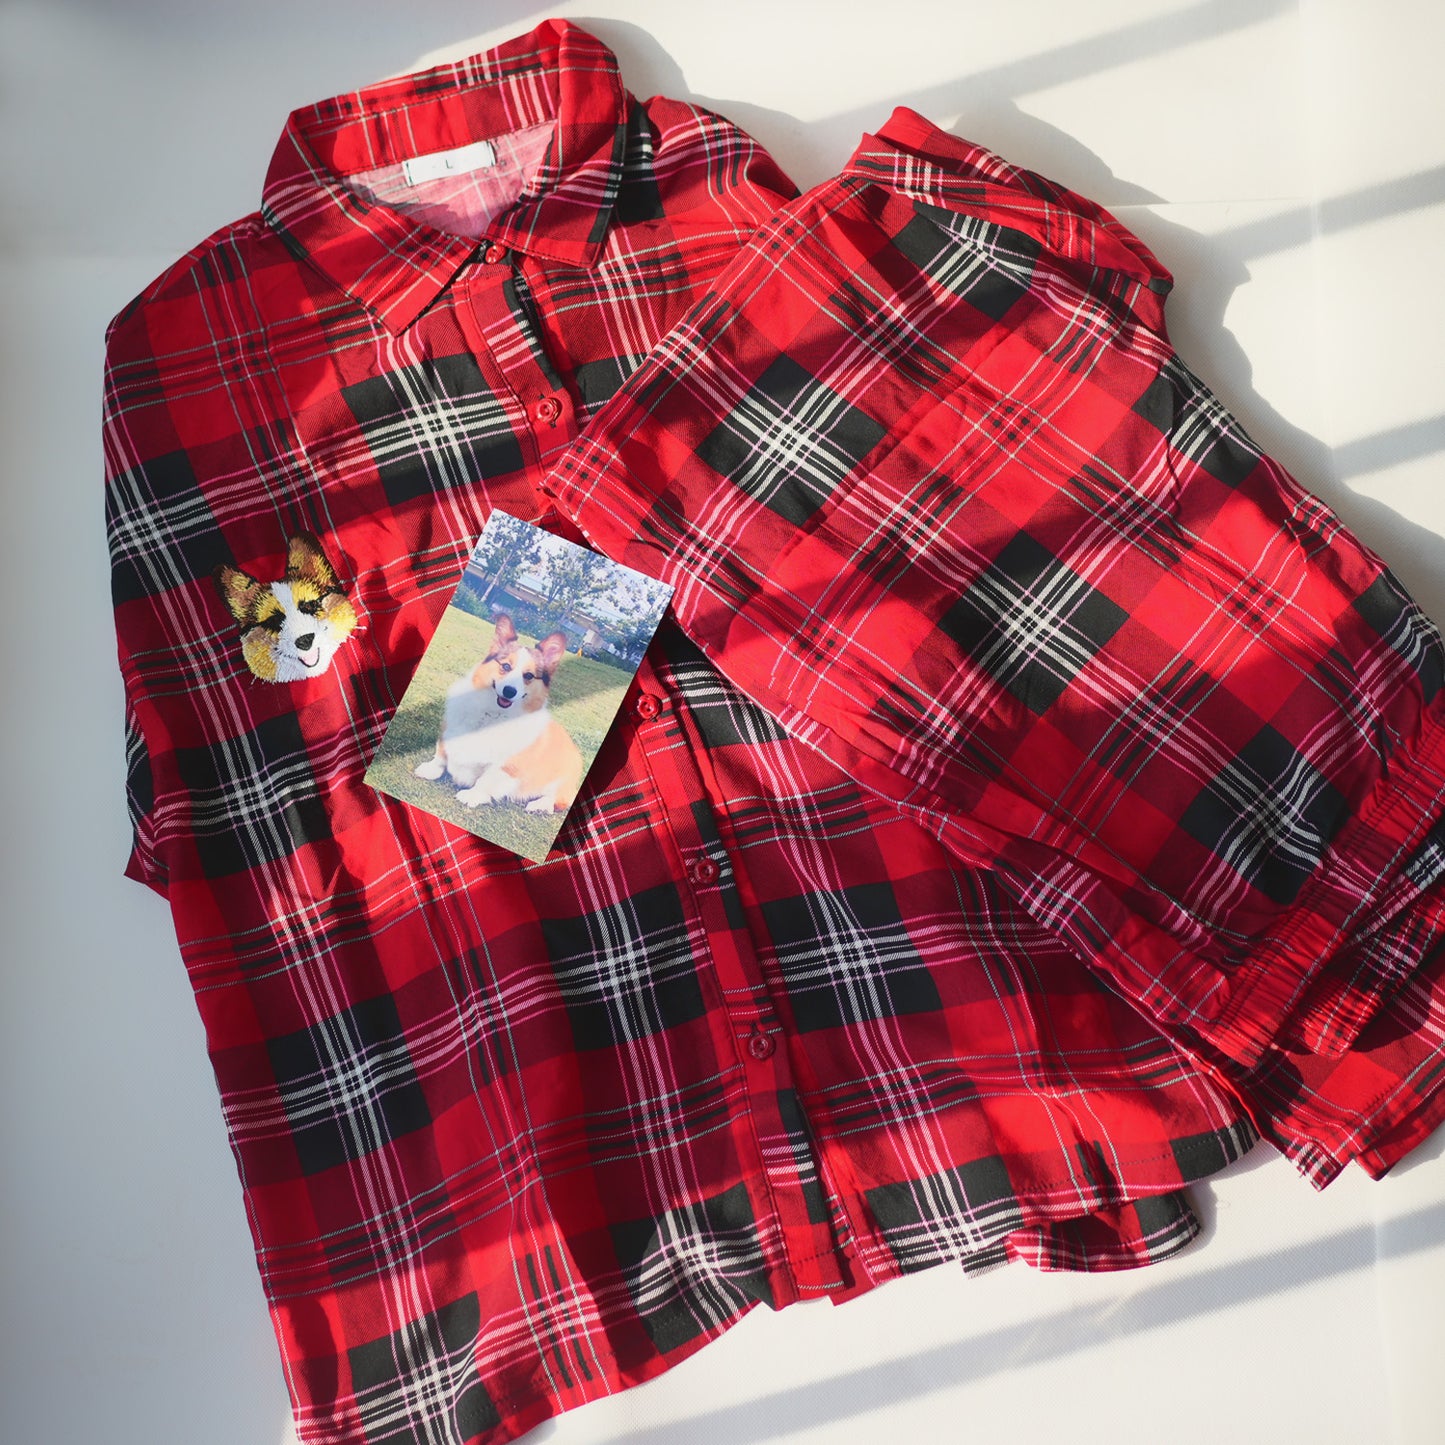 Custom embroidered red plaid shirt, the best gift for relatives and friends